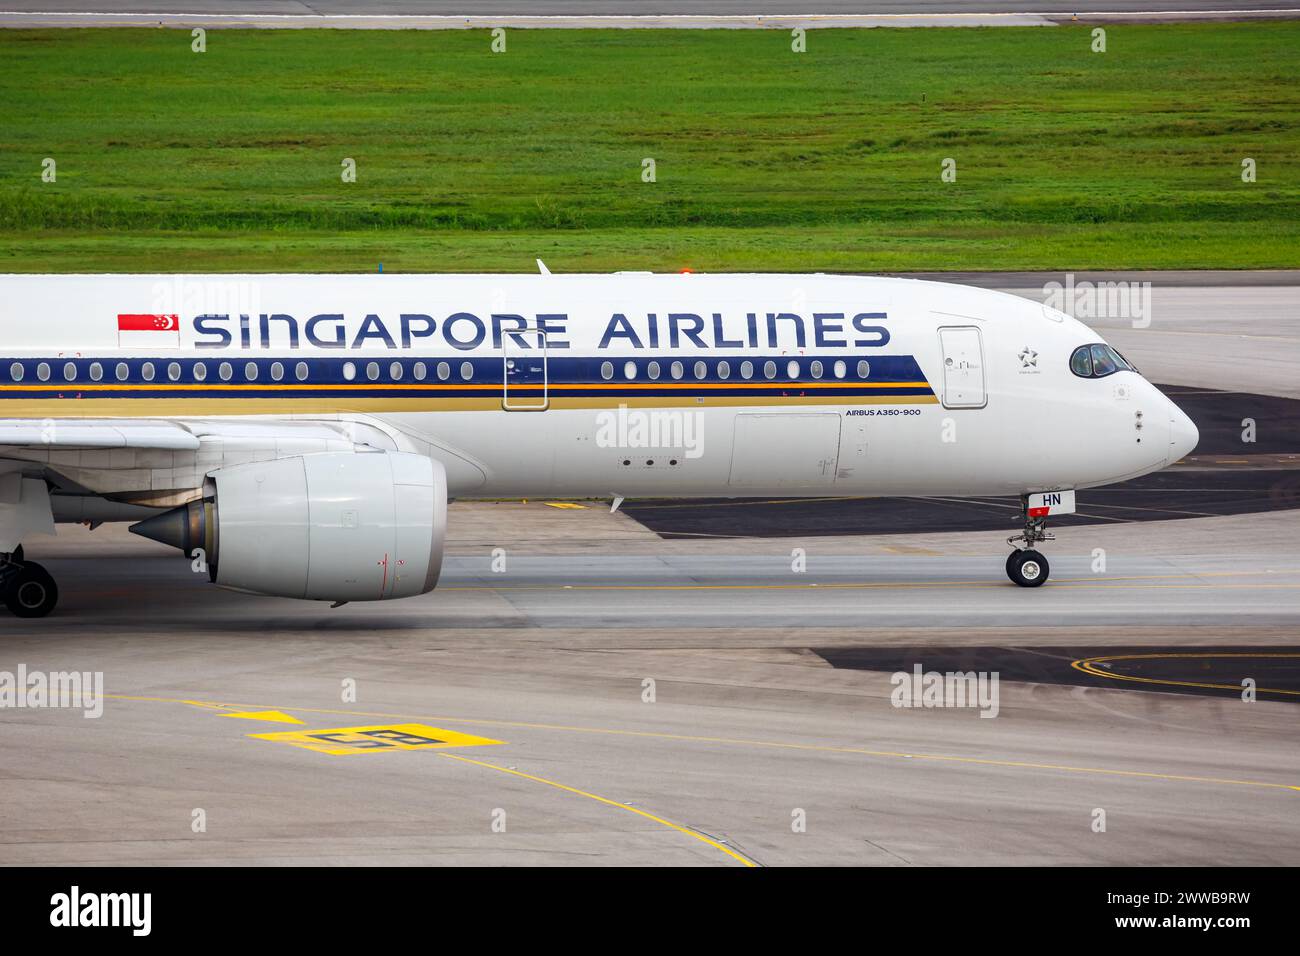 Changi, Singapore - February 3, 2023: Singapore Airlines Airbus A350-900 airplane at Changi Airport (SIN) in Singapore. Stock Photo